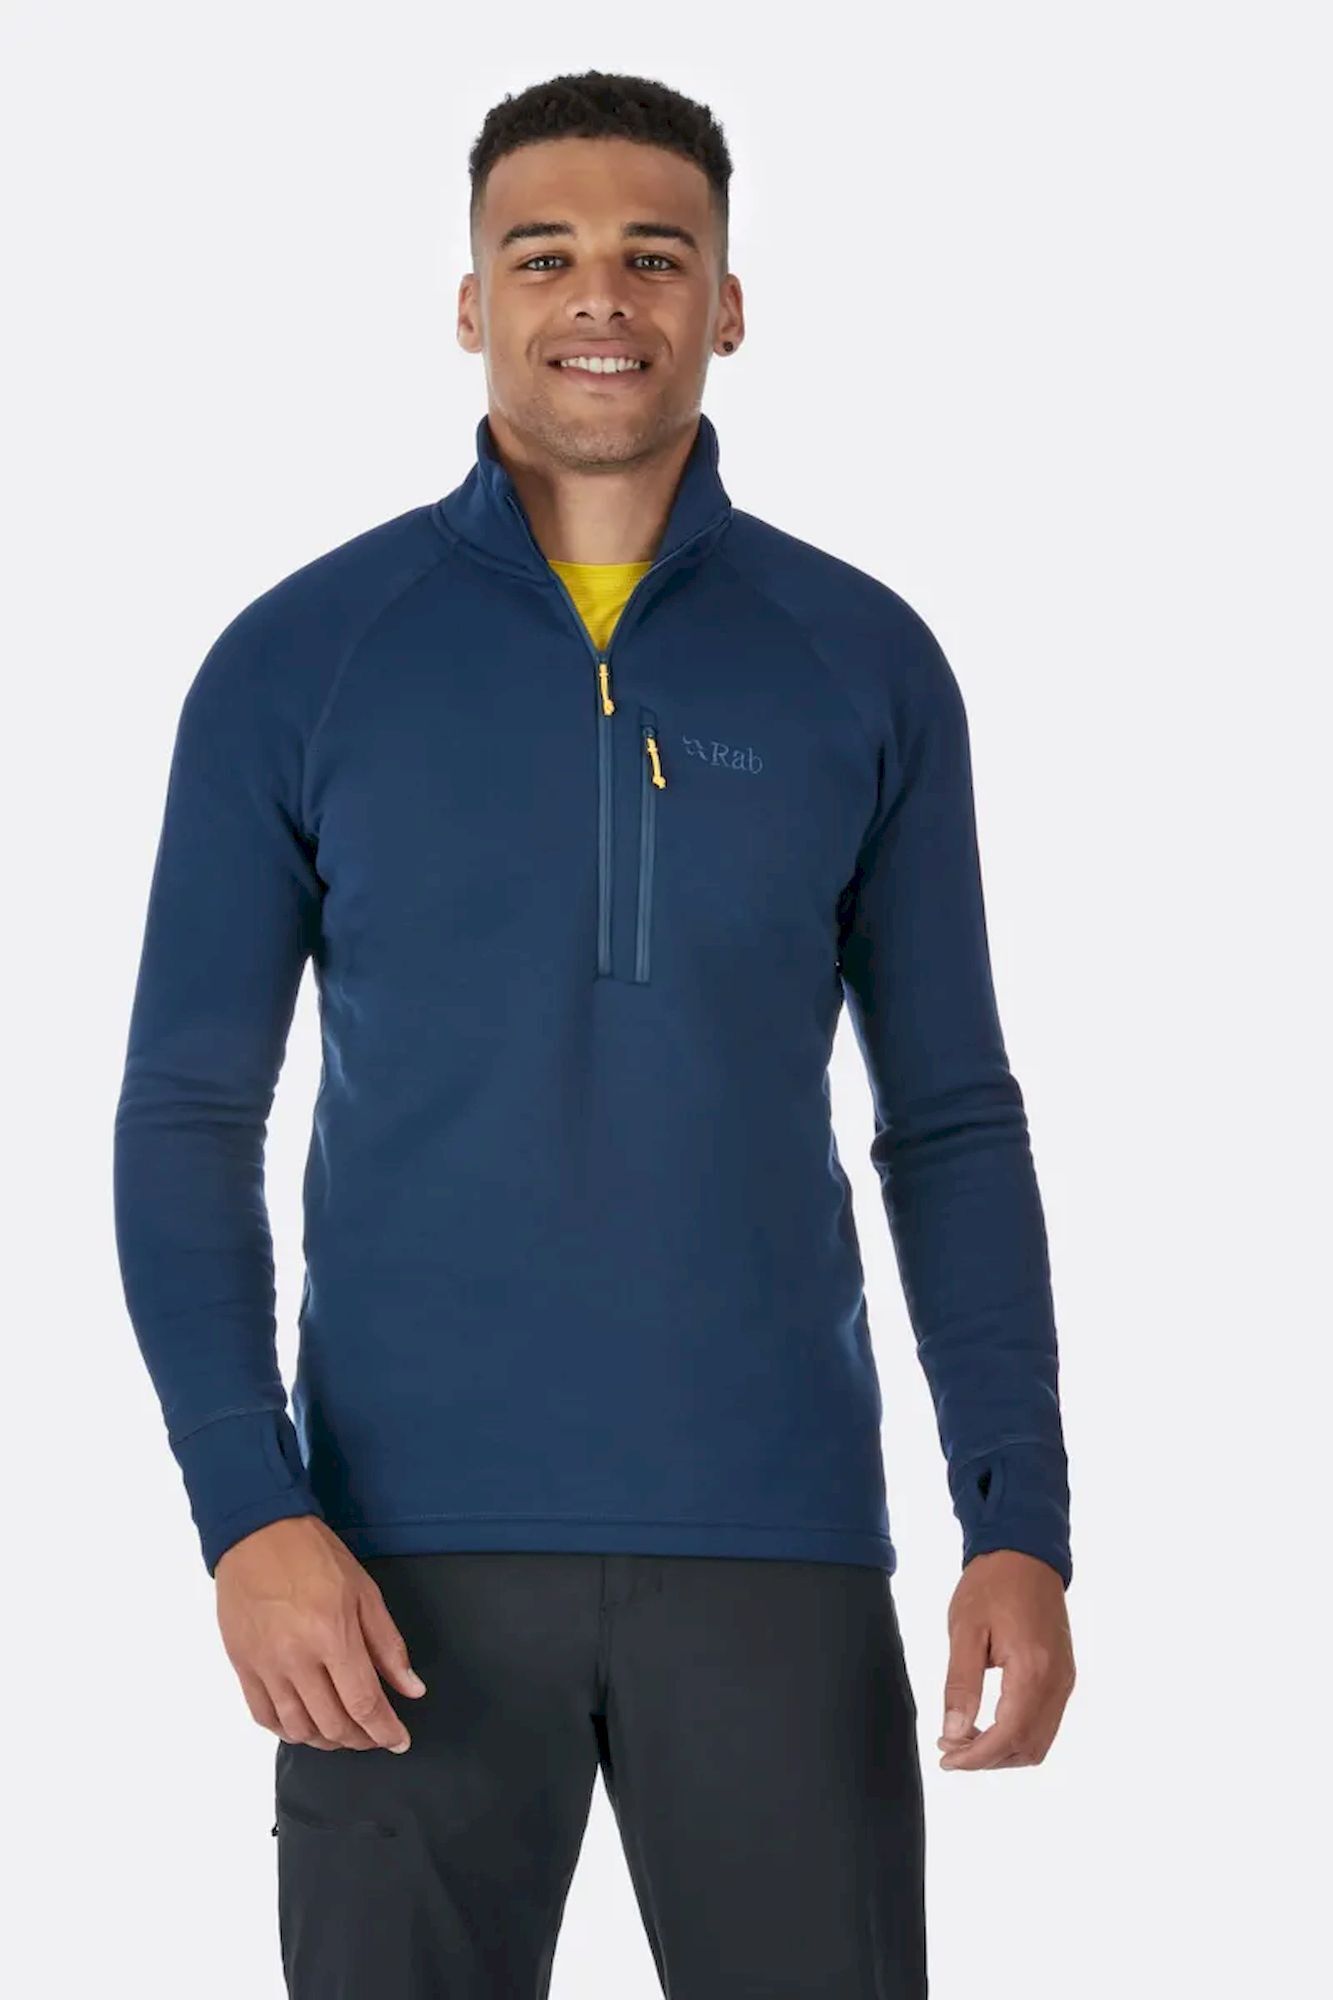 Rab Power Stretch Pro Pull-On - Giacca in pile - Uomo | Hardloop